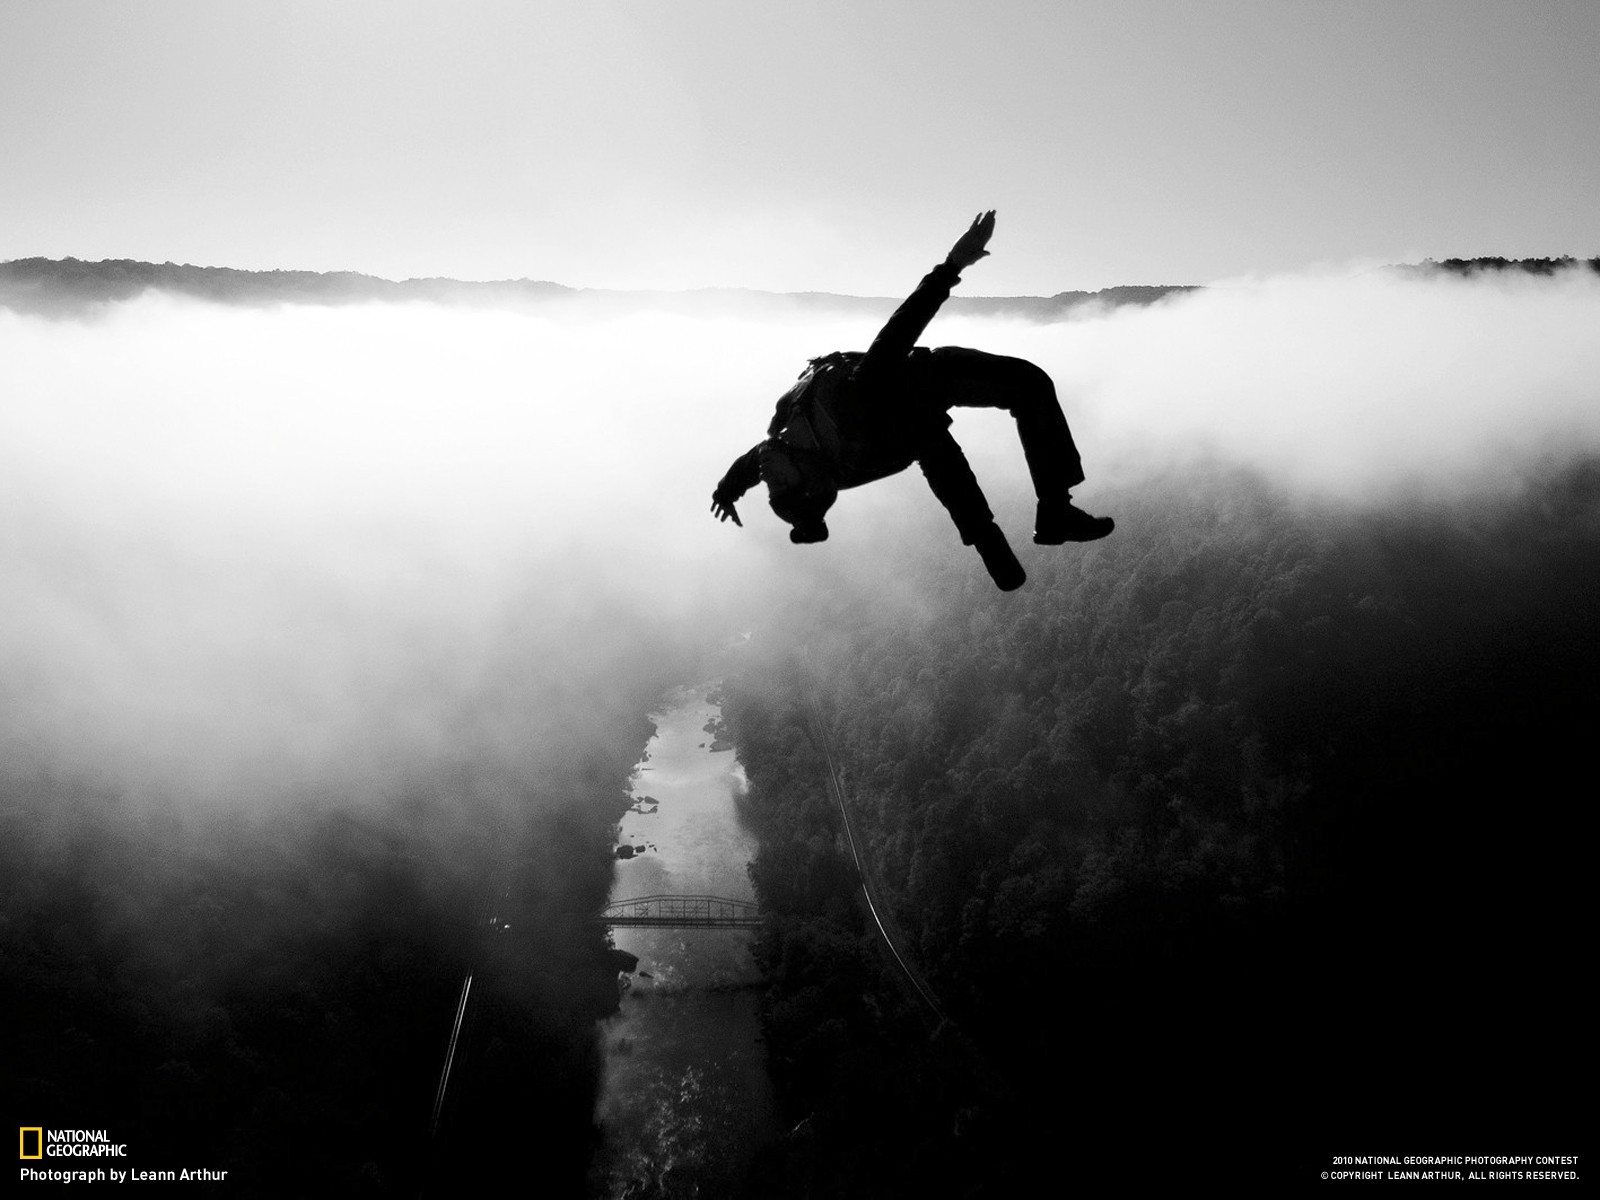 General 1600x1200 jumping clouds monochrome landscape National Geographic 2010 (Year)